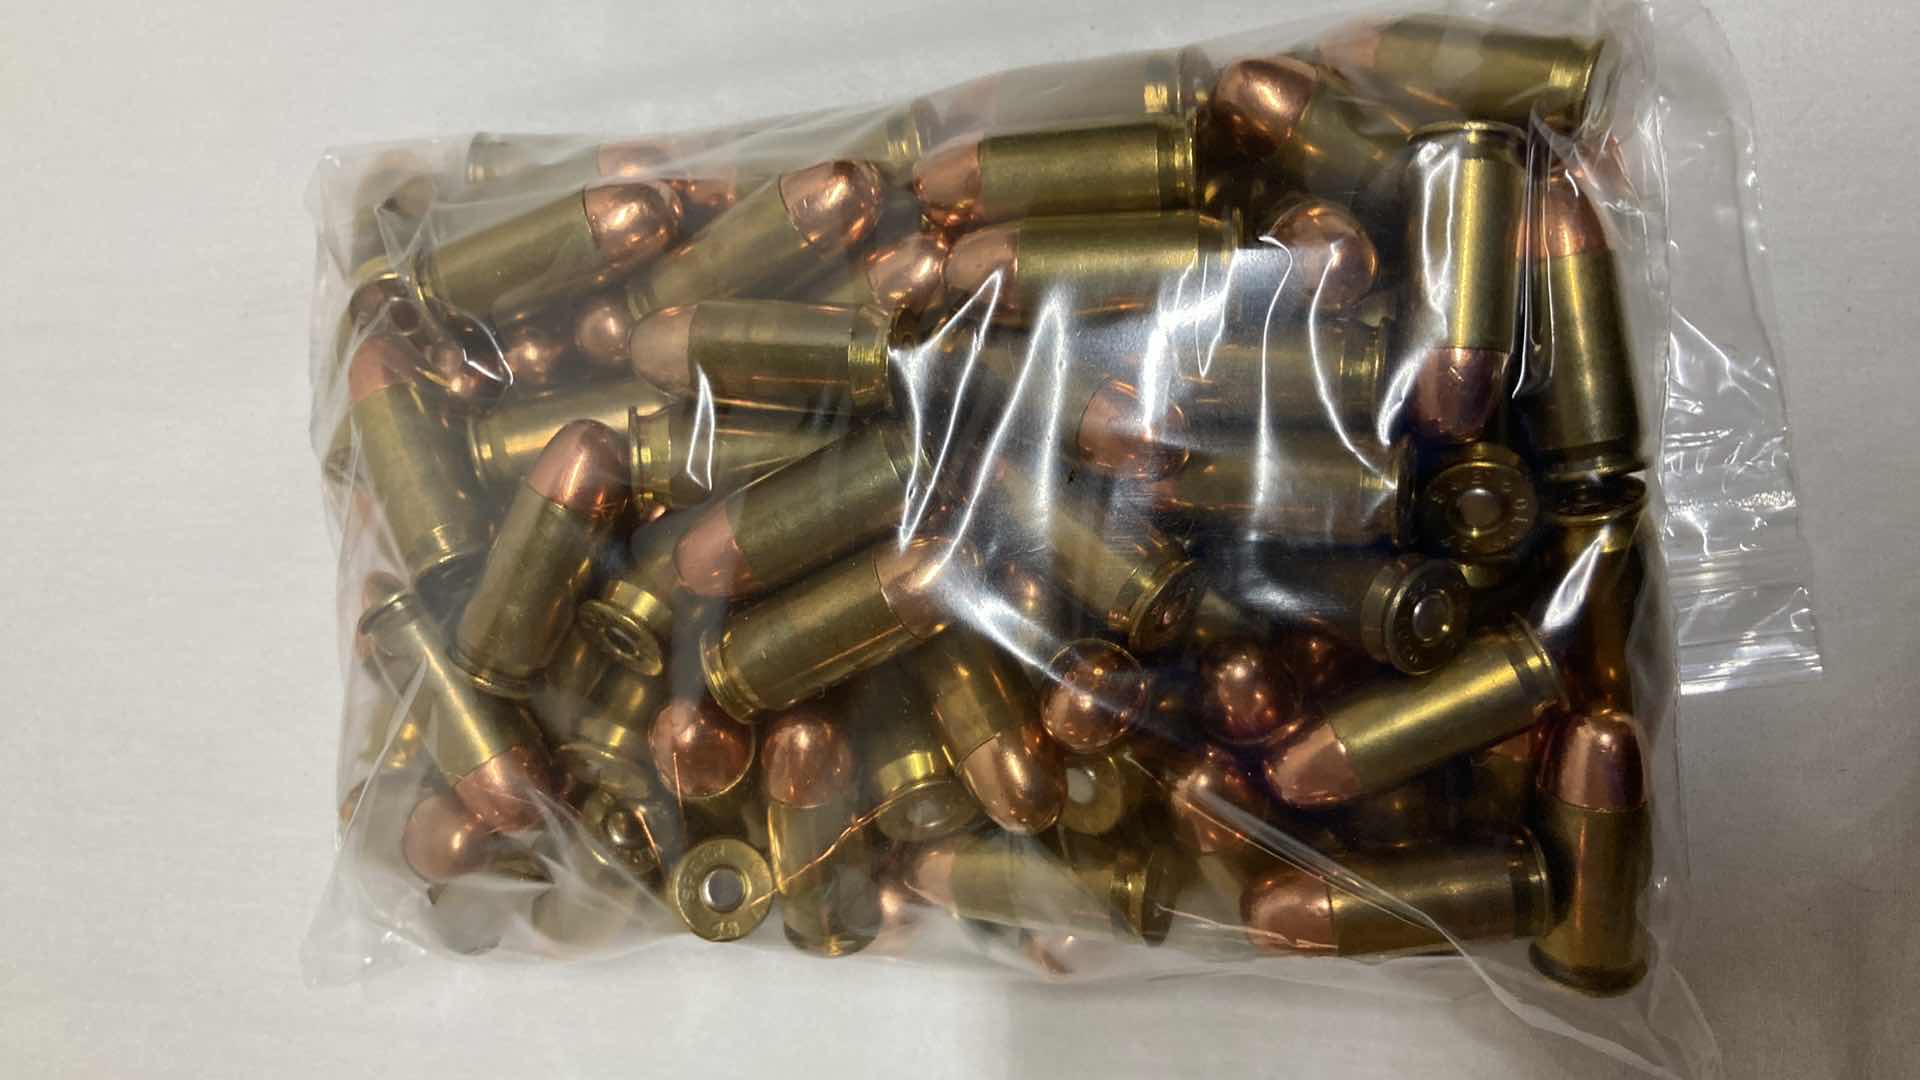 Photo 3 of WASHOUGAL RIVER CARTRIDGE COMPANY 45 ACP 230GR TMJ BRASS CASE AMMO RELOADS (131RDS)